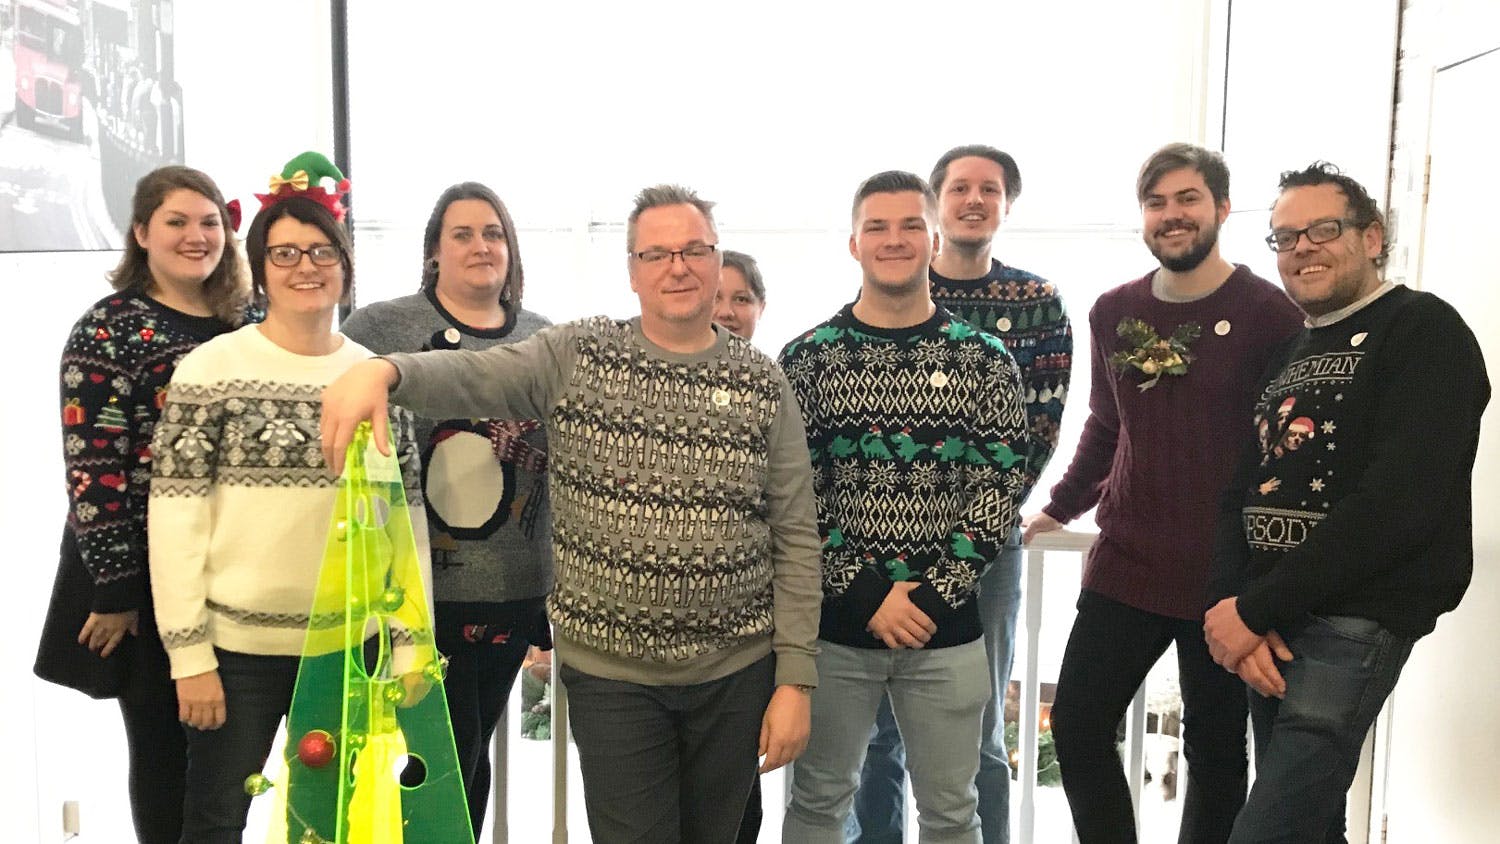 The Bright World Team sporting their festive knits